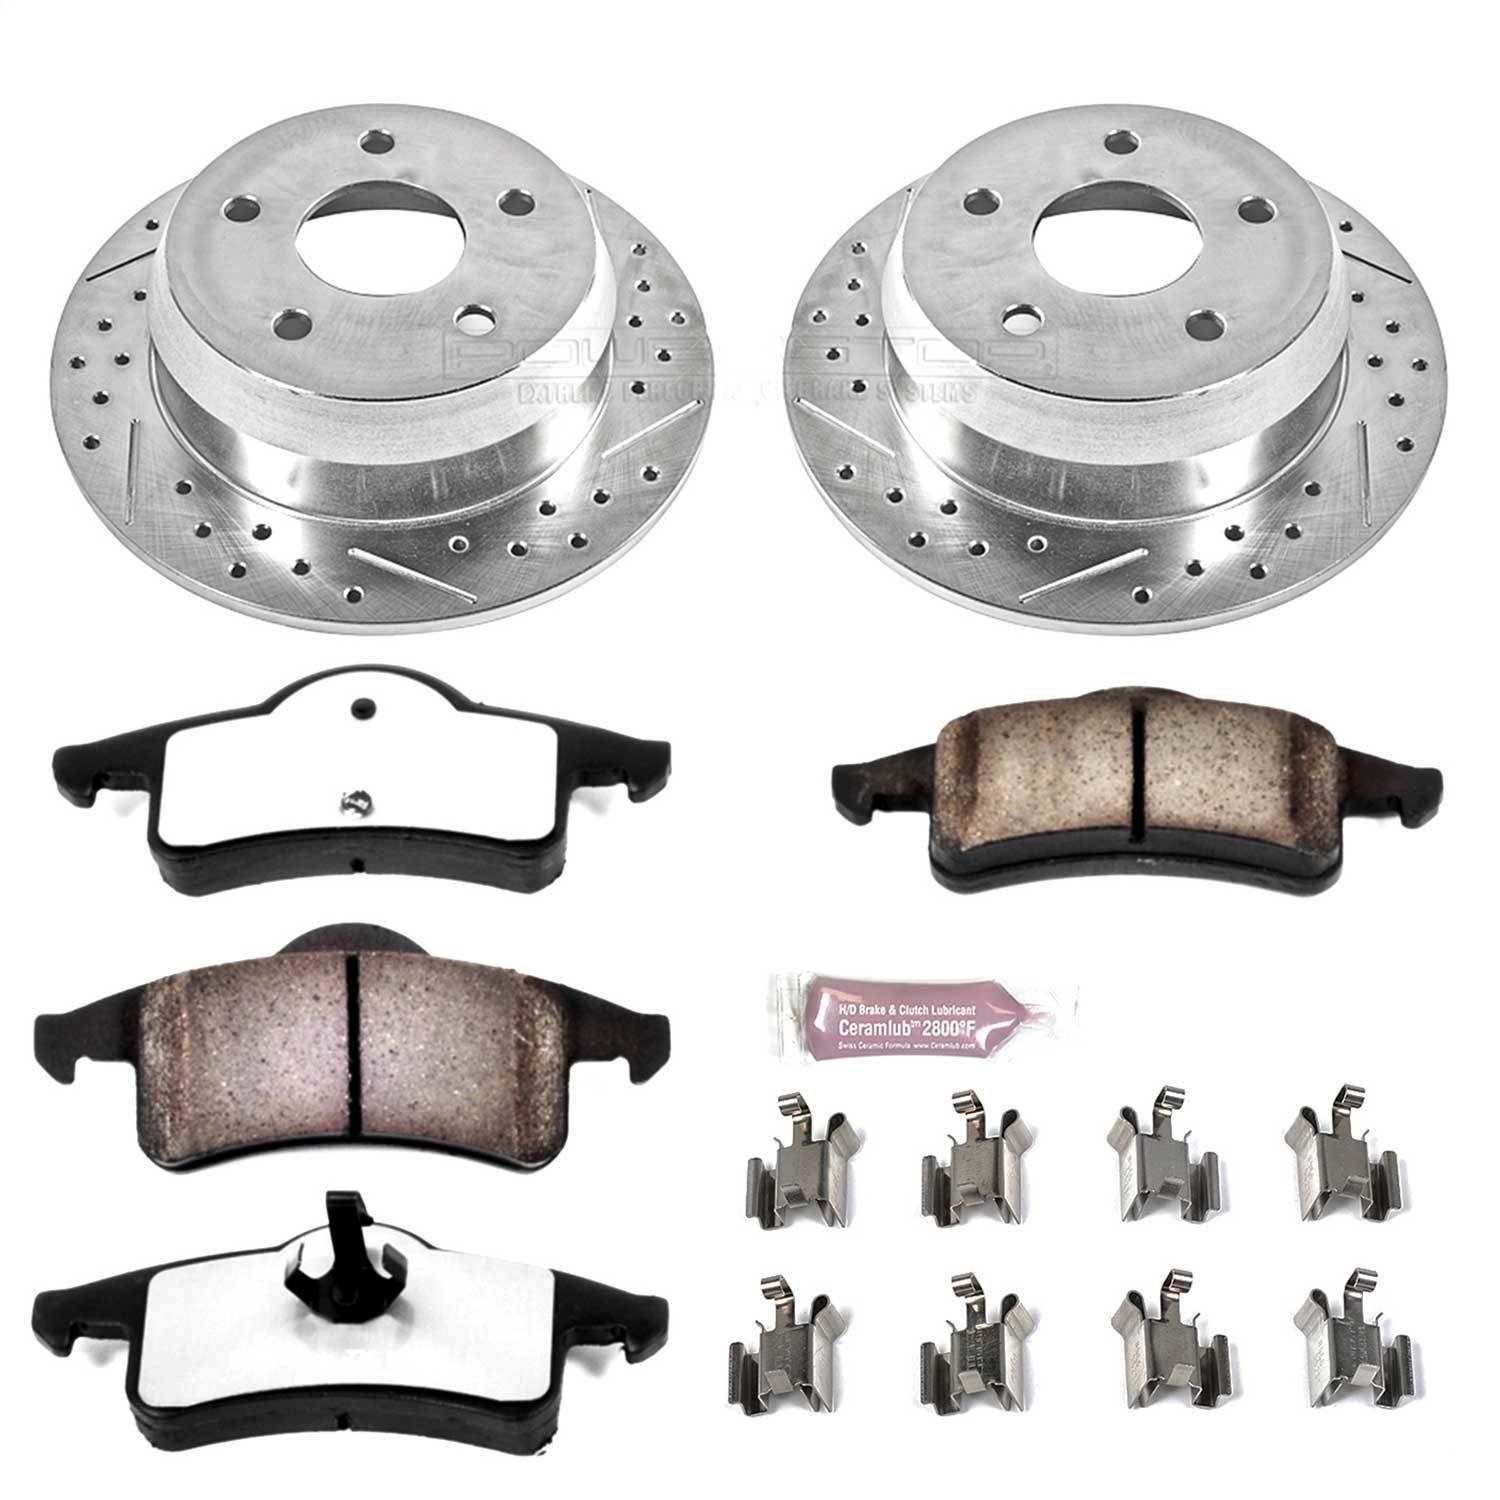 Z36 Rear Brake Pads & Rotor Kit for Truck and Tow